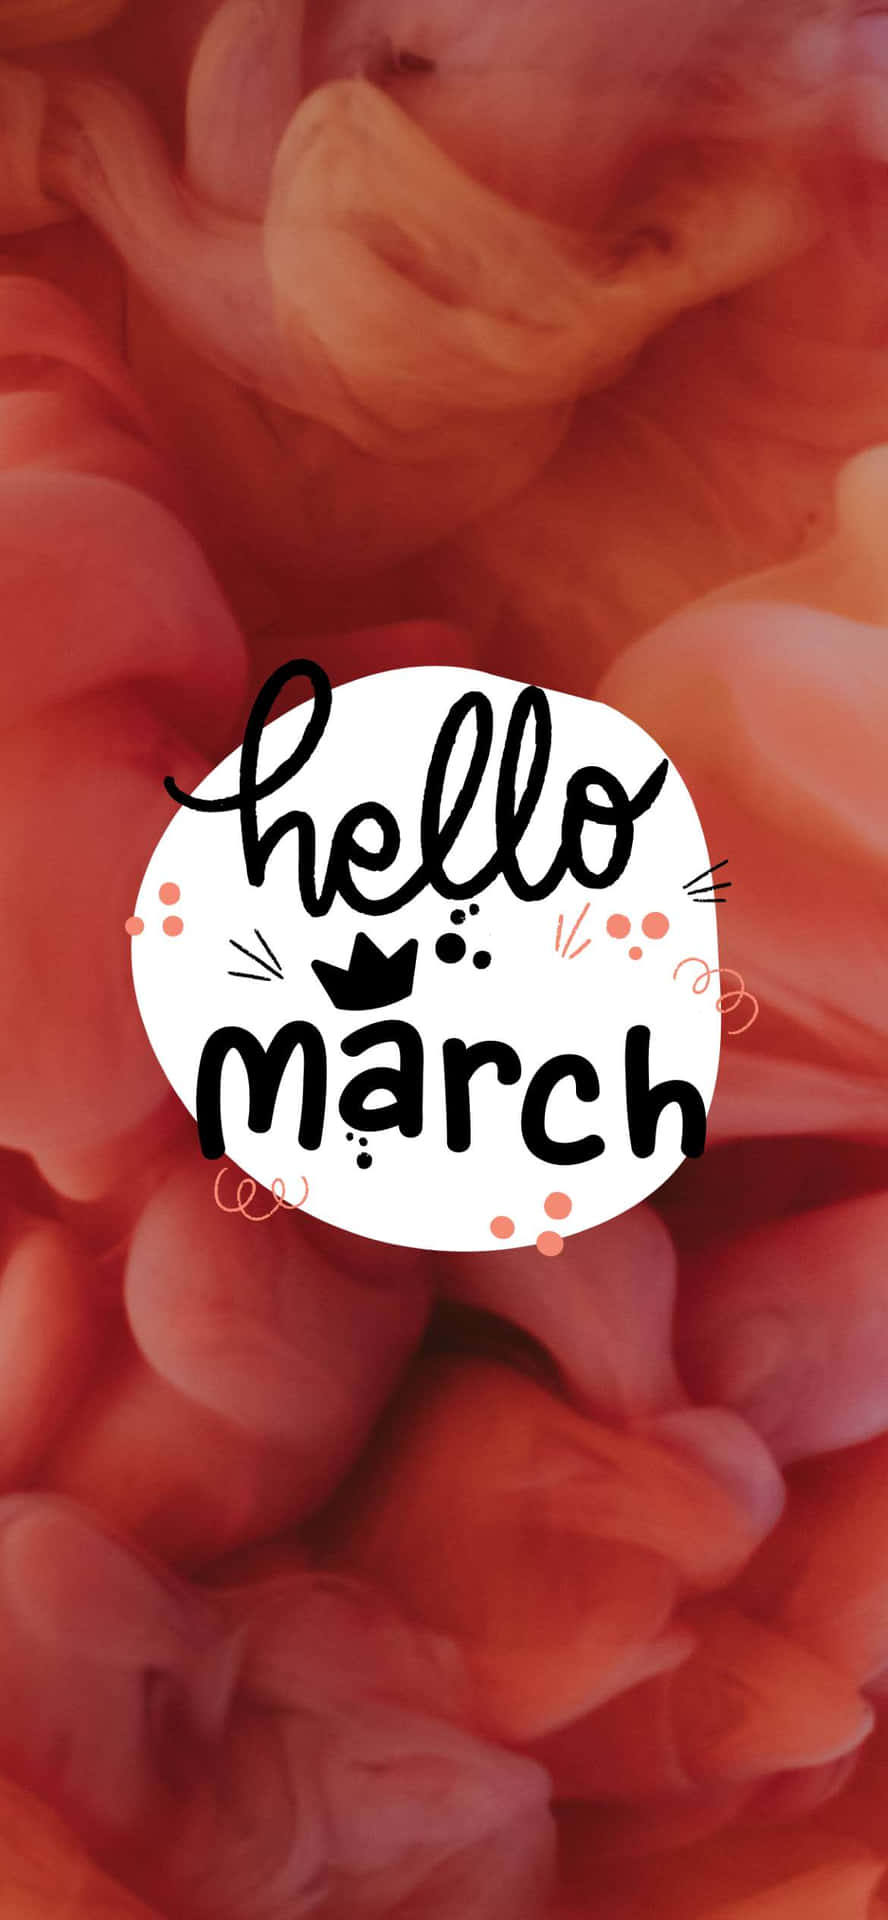 Marching into Spring with Cute March Wallpaper